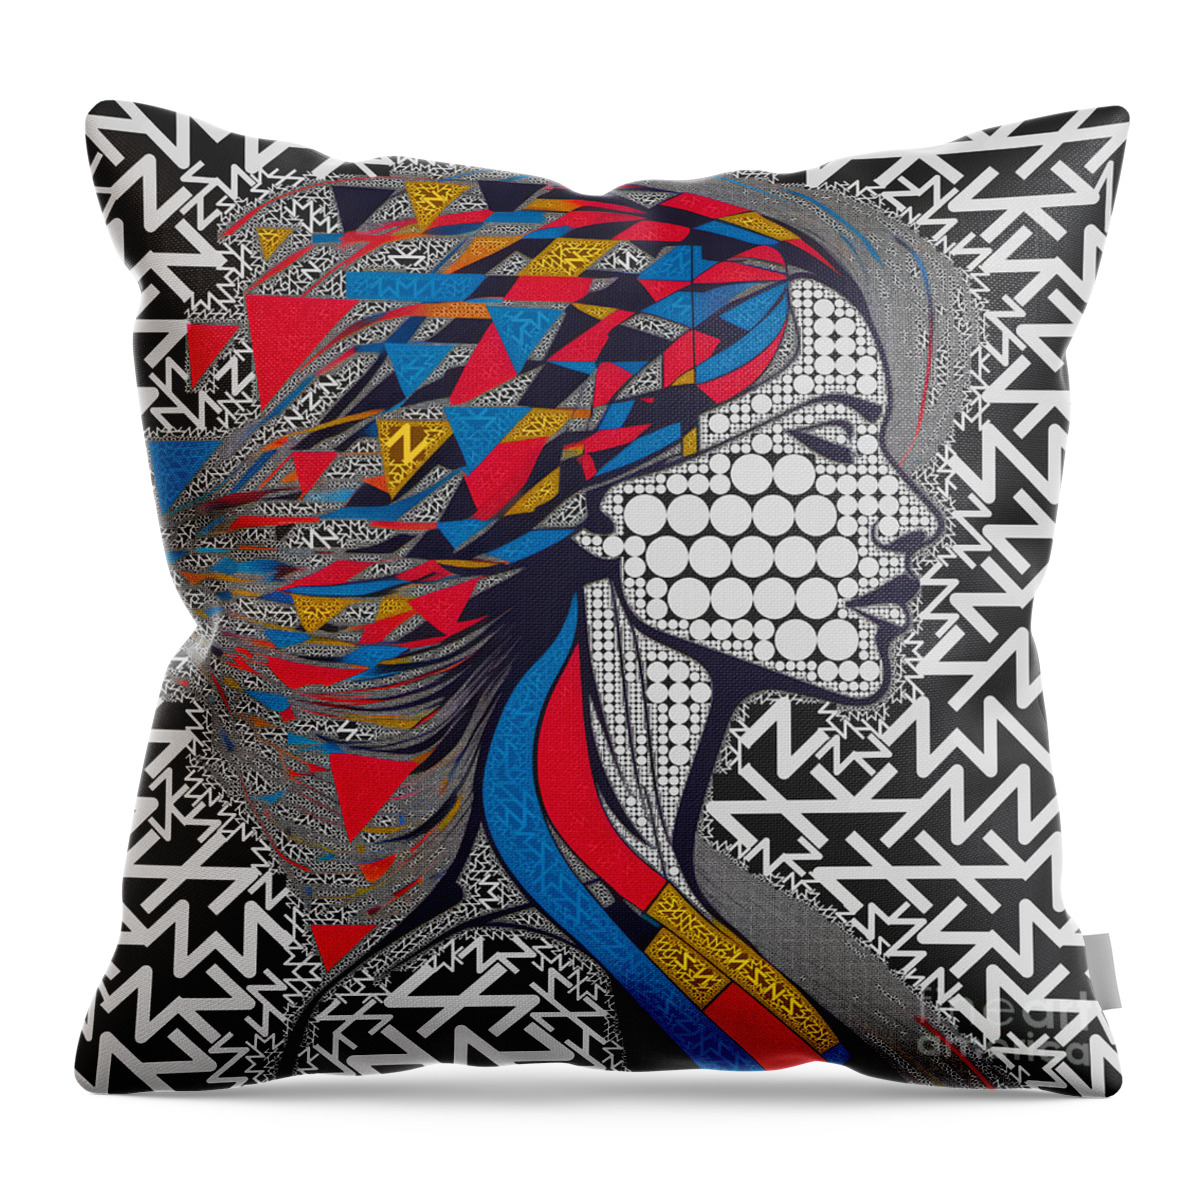 Abstract Throw Pillow featuring the digital art Modern Abstract Portrait - 02795 by Philip Preston